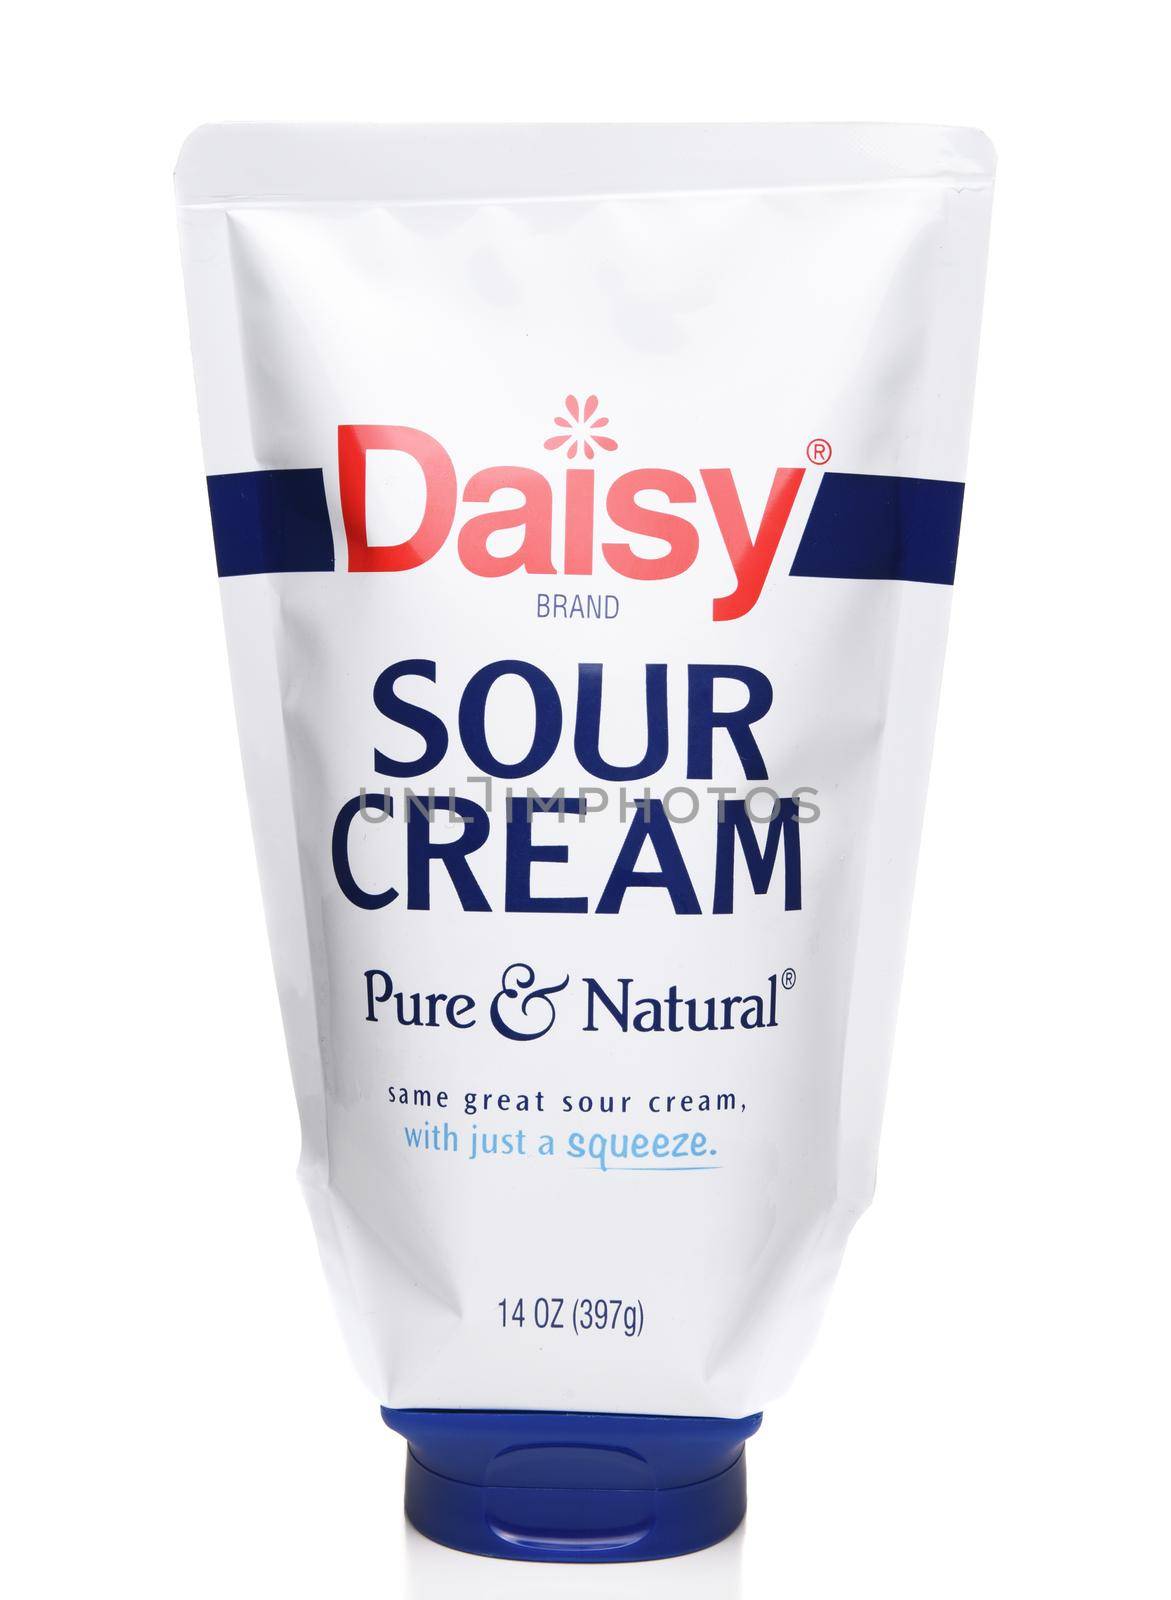 A 14 ounce squeeze container of Daisy Brand Sour Cream by sCukrov